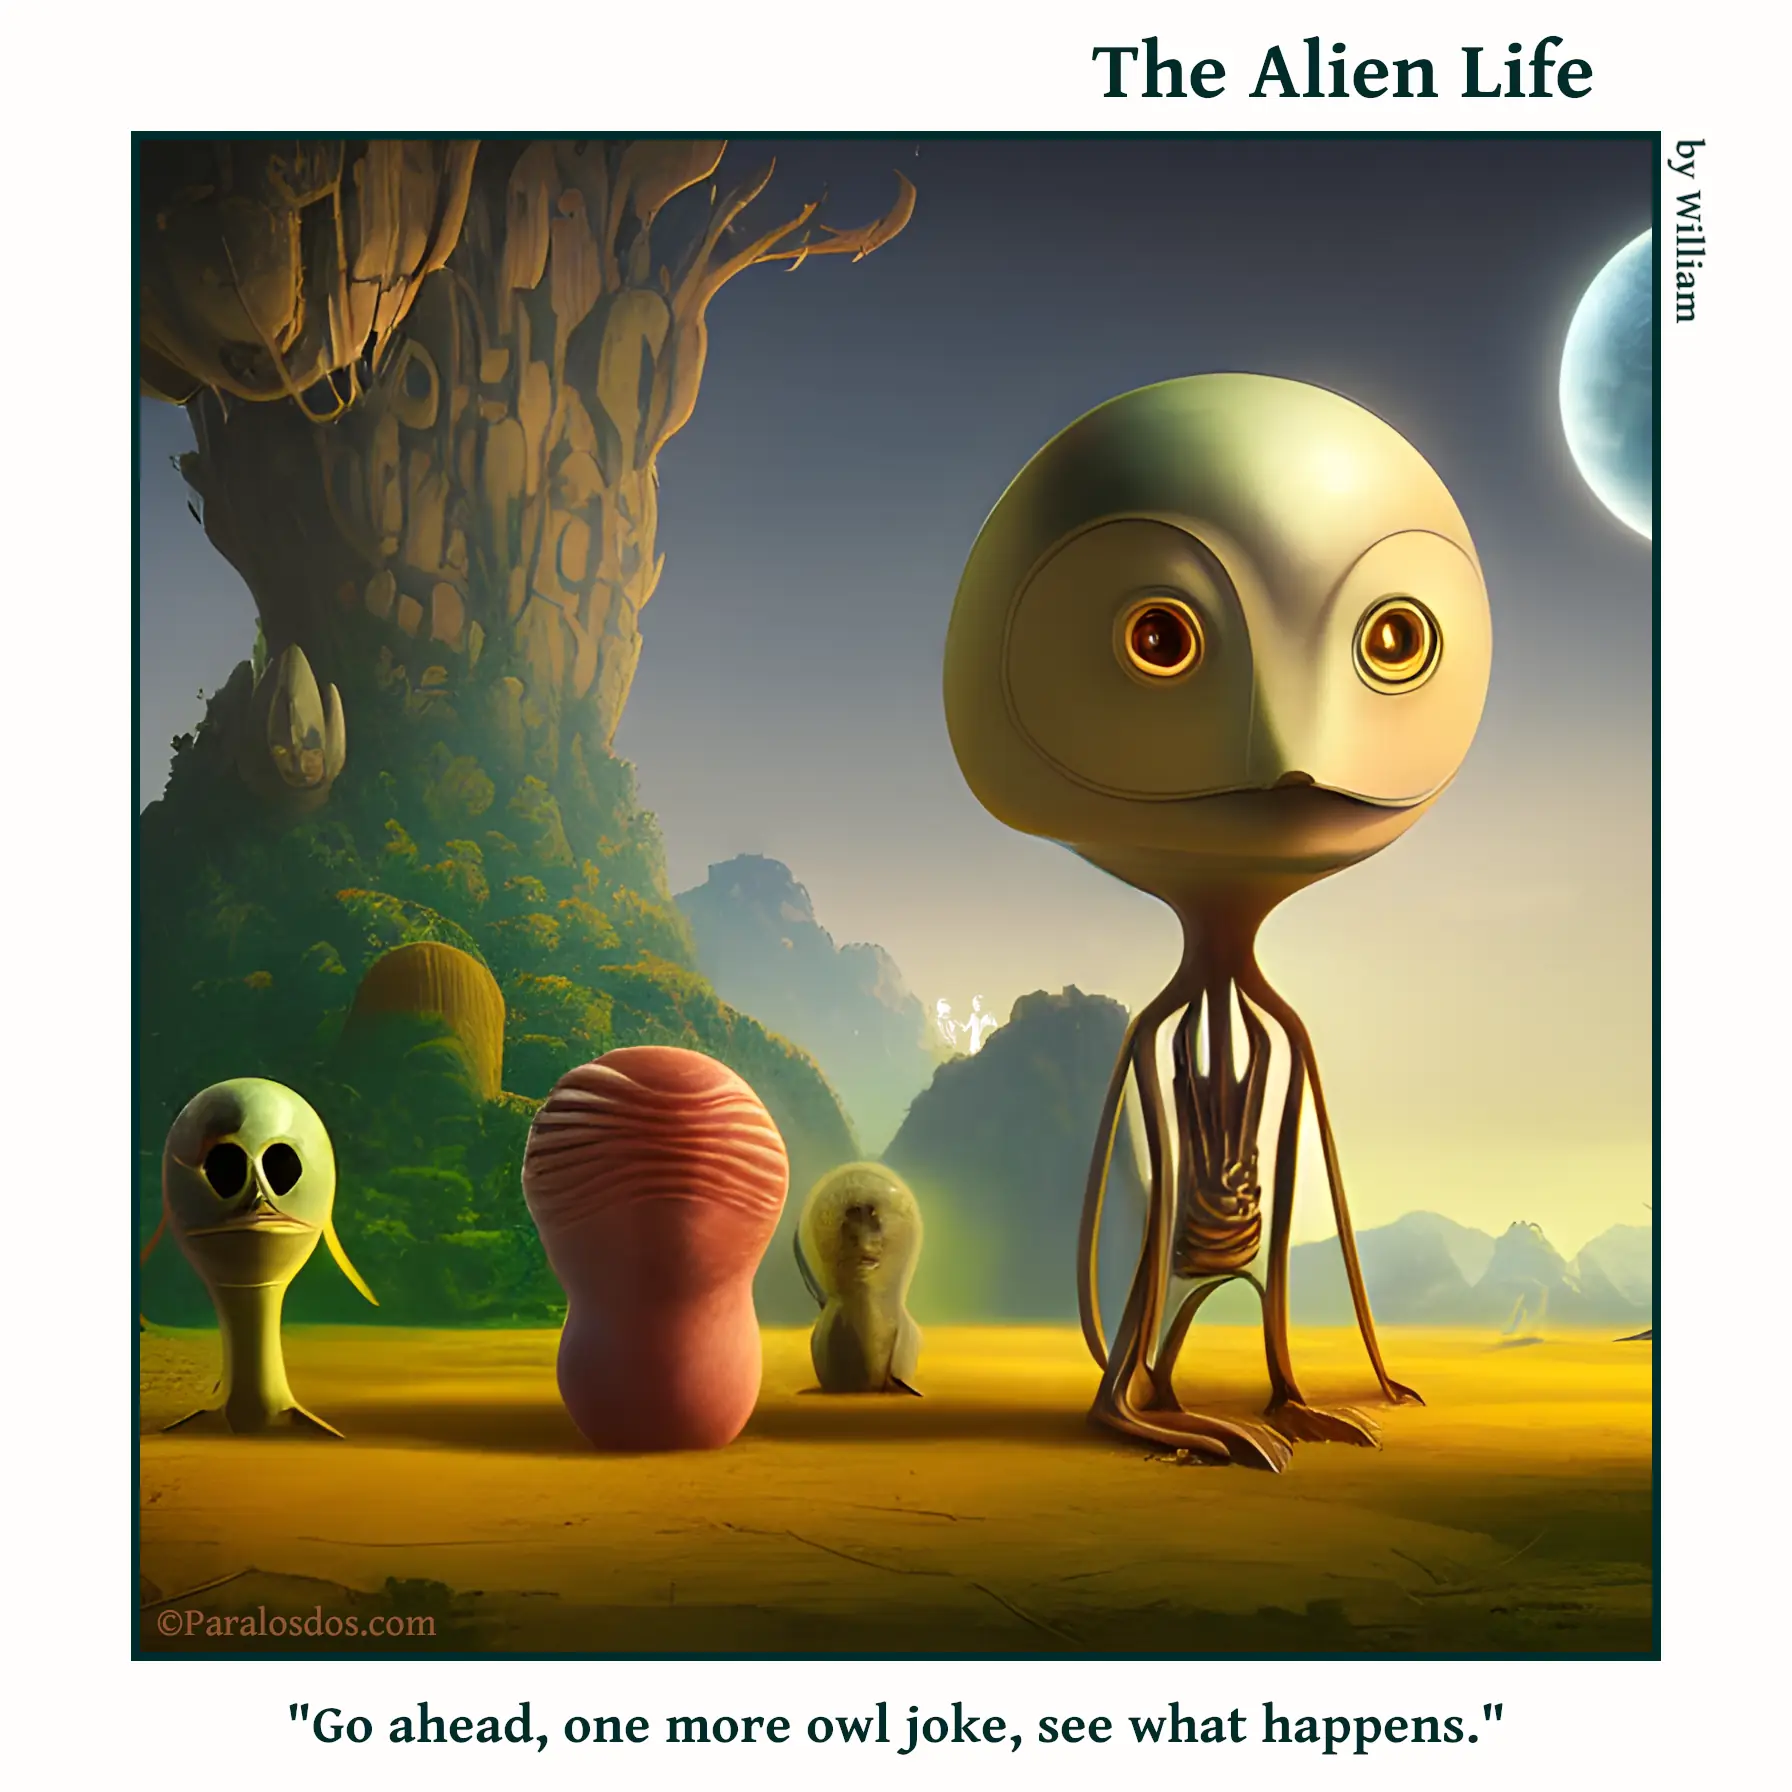 The Alien Life, one panel Comic. An alien with a big head that resembles an owls is walking away from a group of three other aliens. The caption reads: "Go ahead, one more owl joke, see what happens."